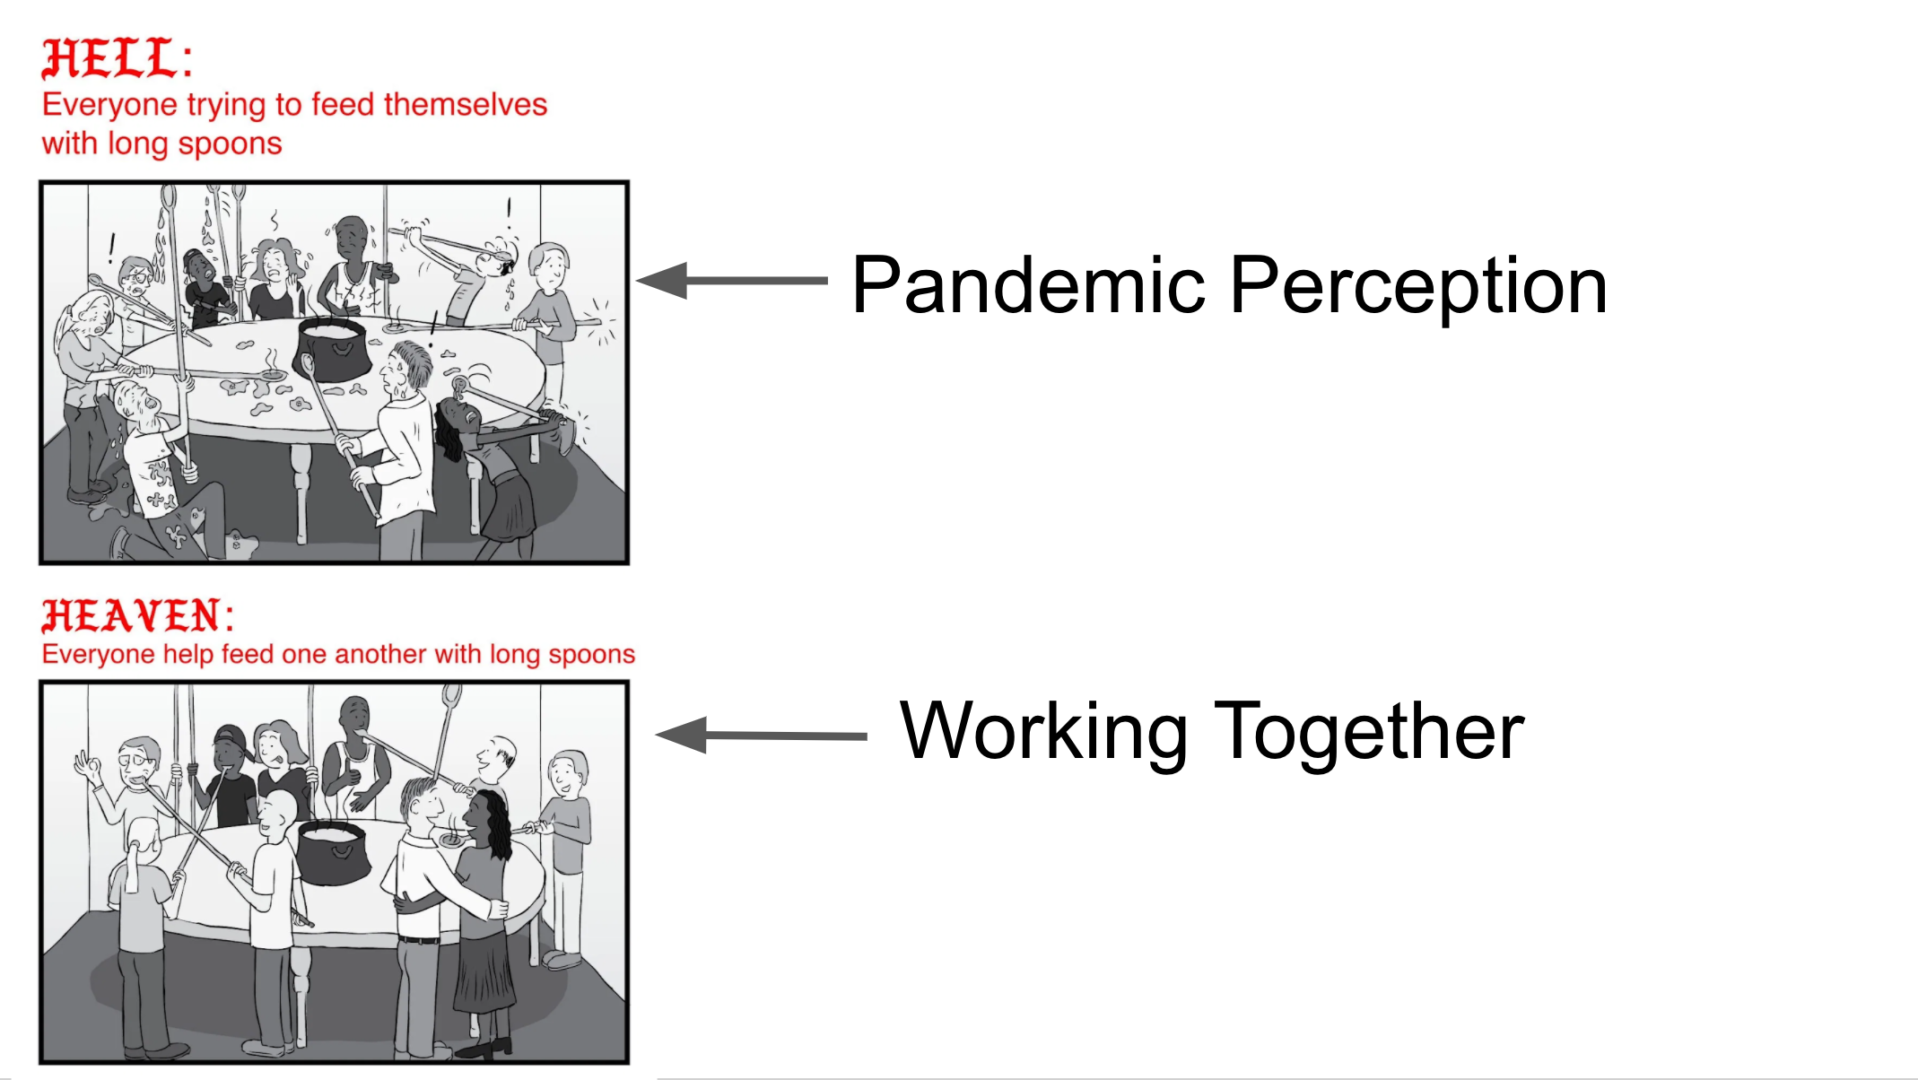 A screenshot of a presentation slide has an image of people struggling to feed themselves with long spoons with the captions "hell" and "pandemic perception" while another imge shoes people feeding each other with long spoons and the captions "heaven" and "working together."